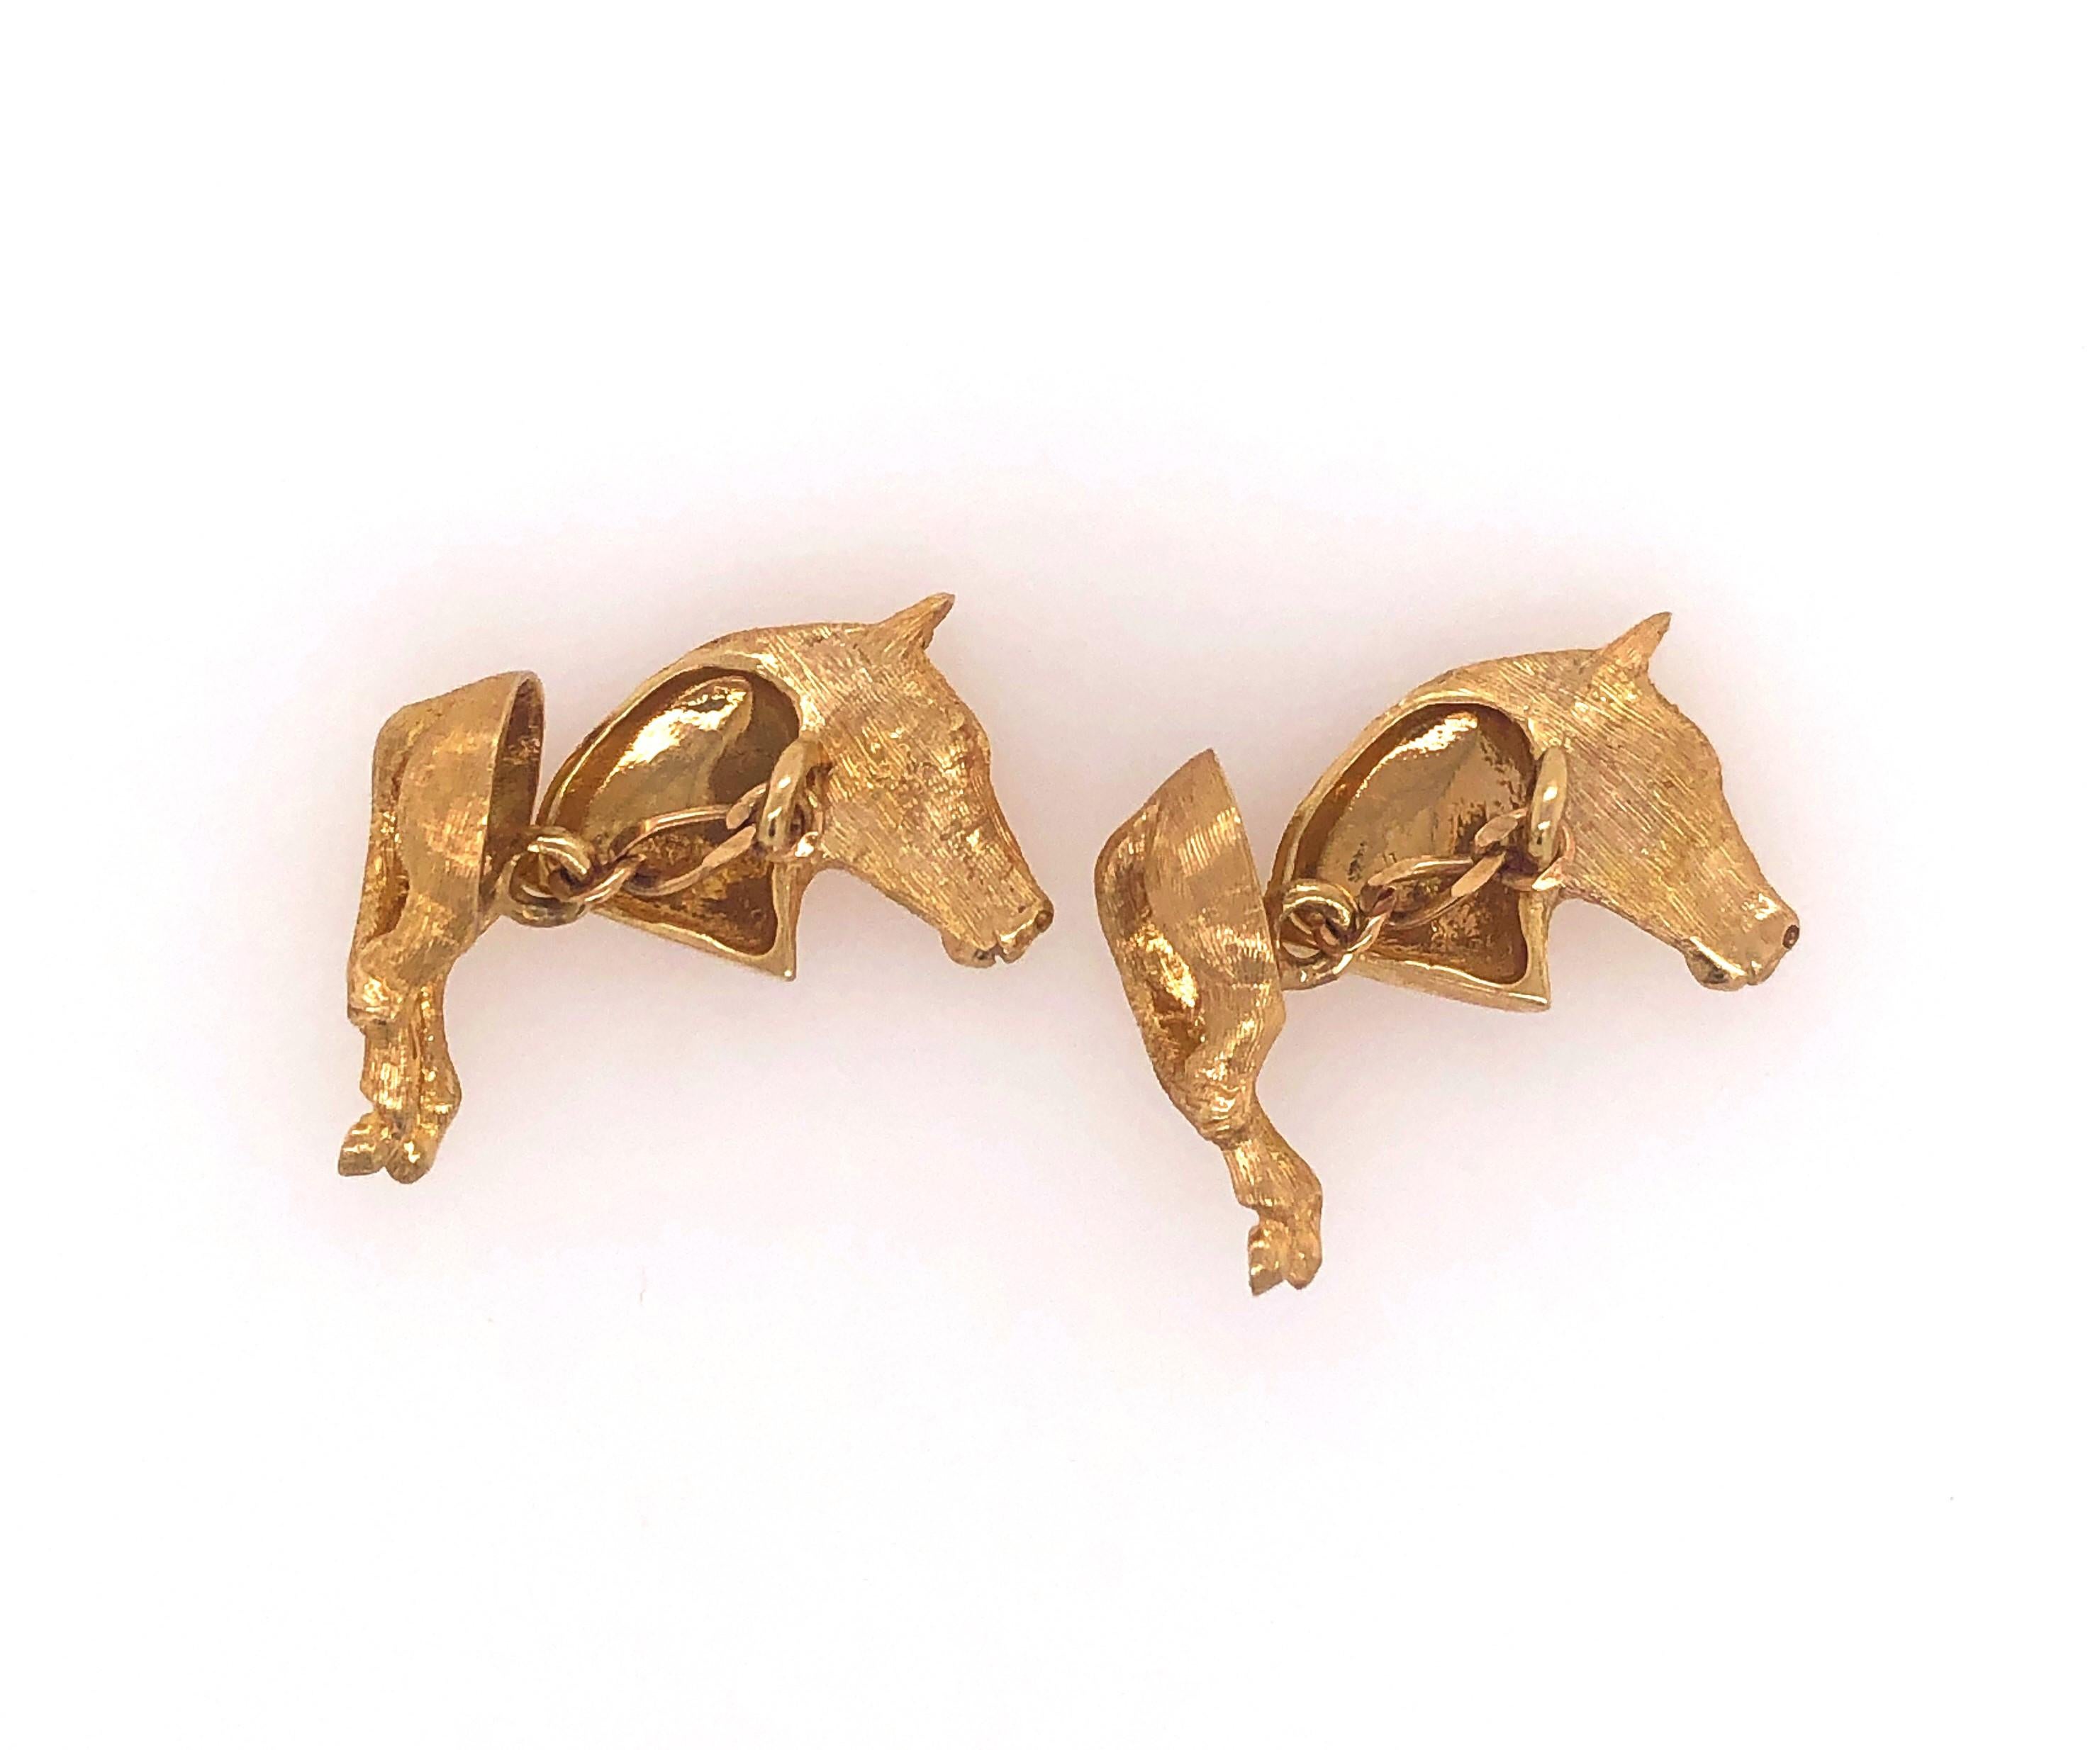 These curious horse head and hind quarters fourteen carat 14K yellow gold cuff links are sure to be a conversation starter!  In satin yellow gold with good detail, the horse head measures approximately 13.5 x 19.5 mm and has a diamond eye followed